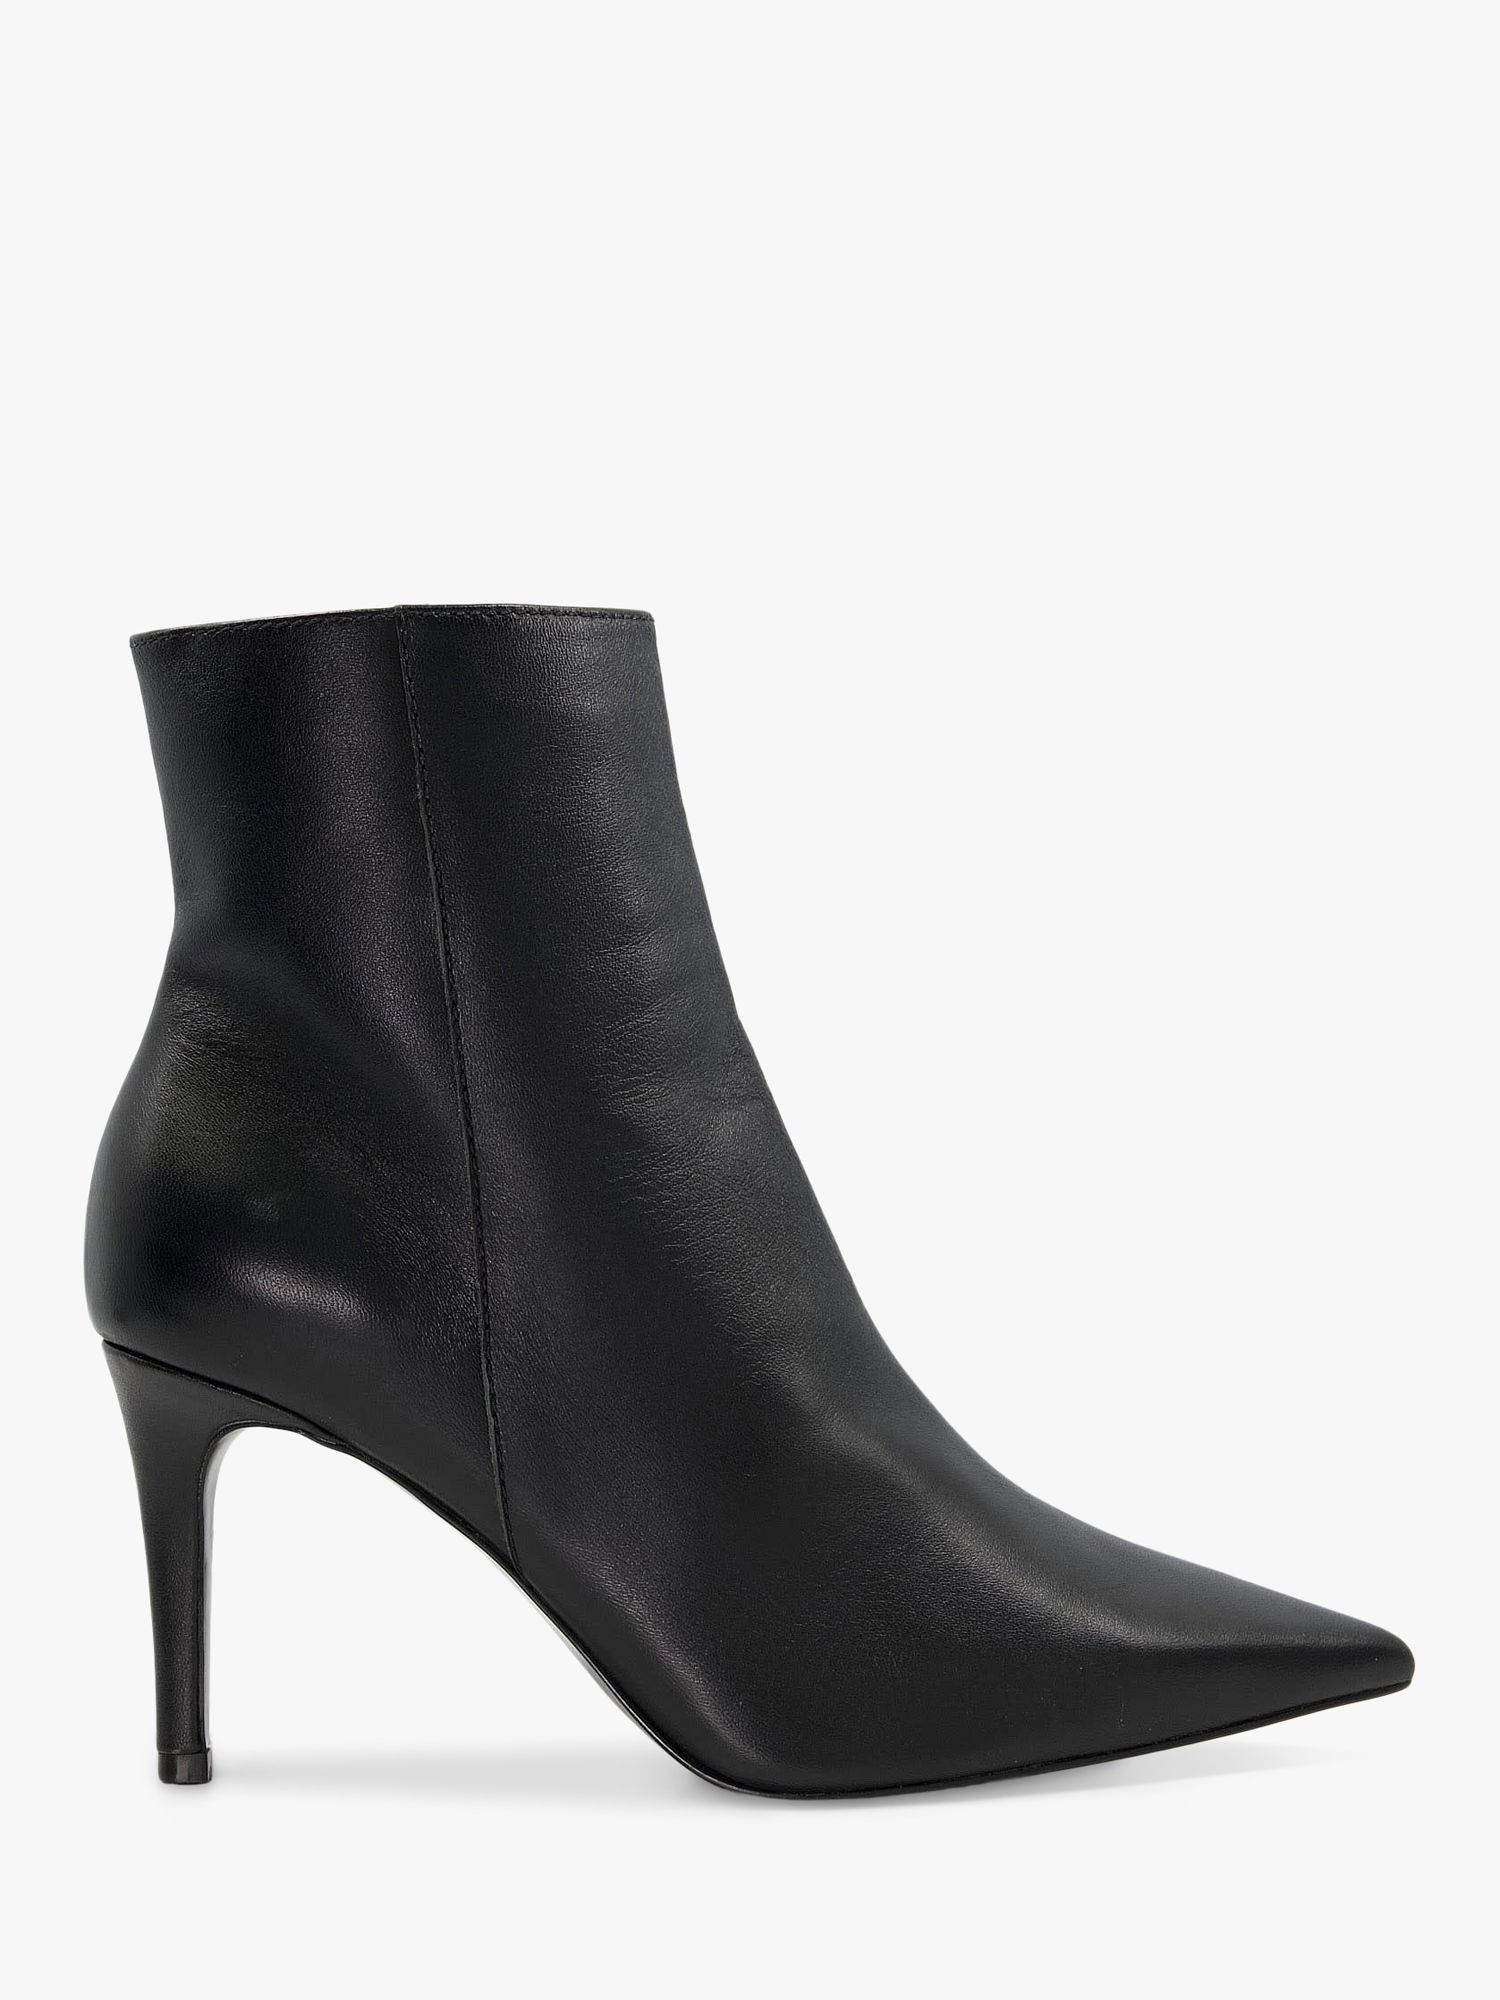 Oliyah High Ankle Boots, at John Lewis & Partners